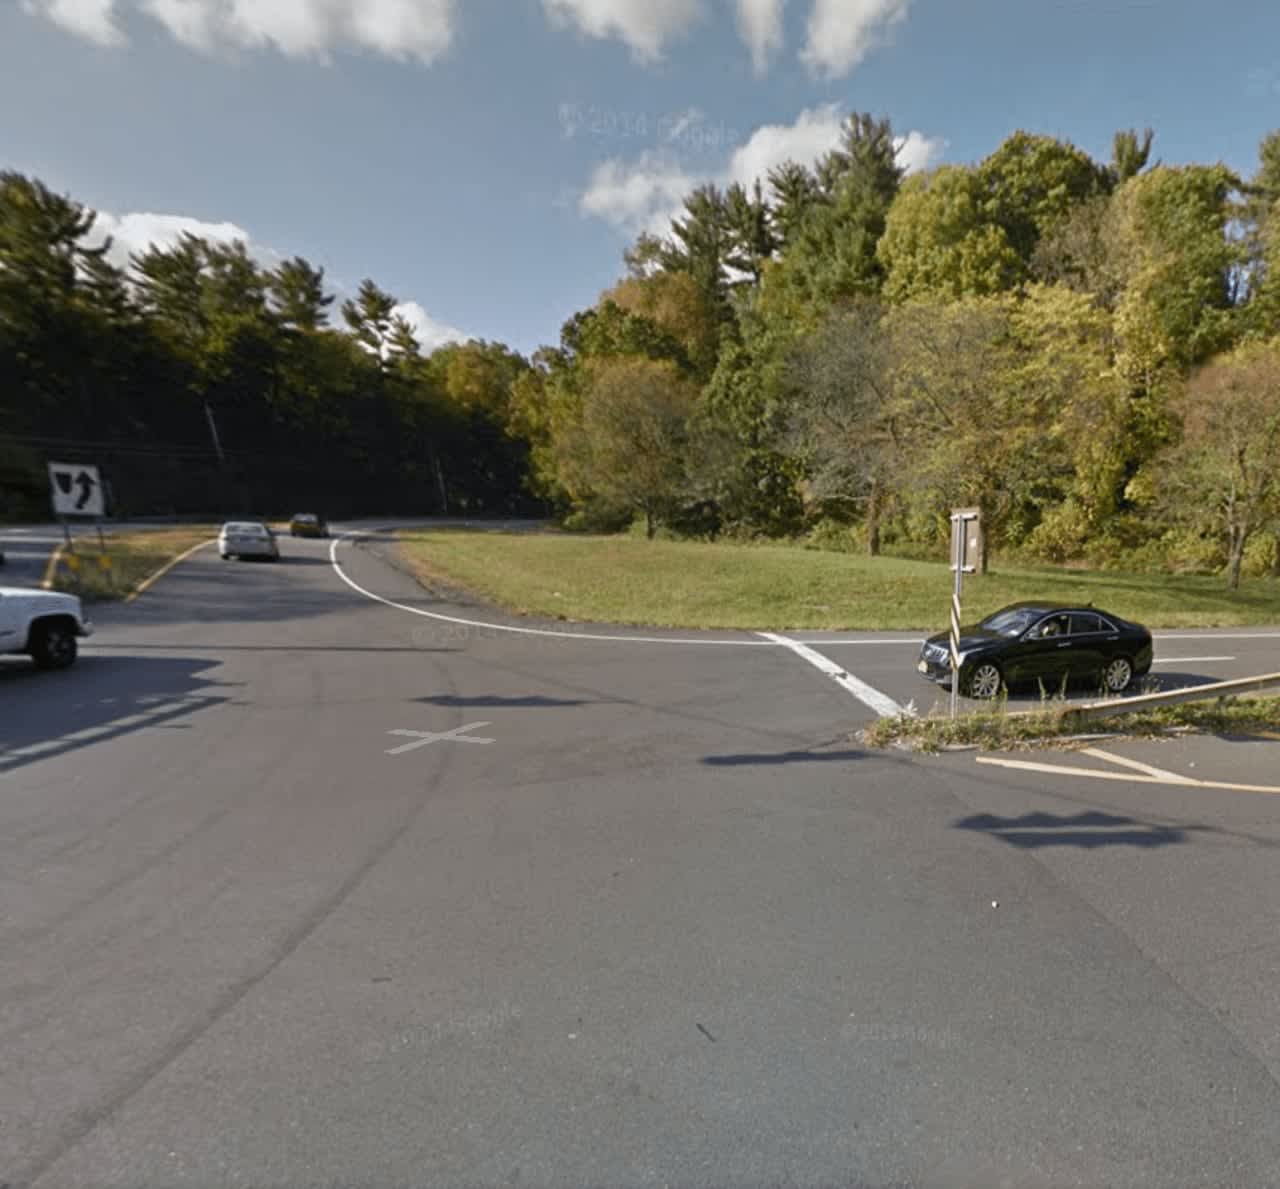 Route 22 at the intersection of Route 120 in Armonk.